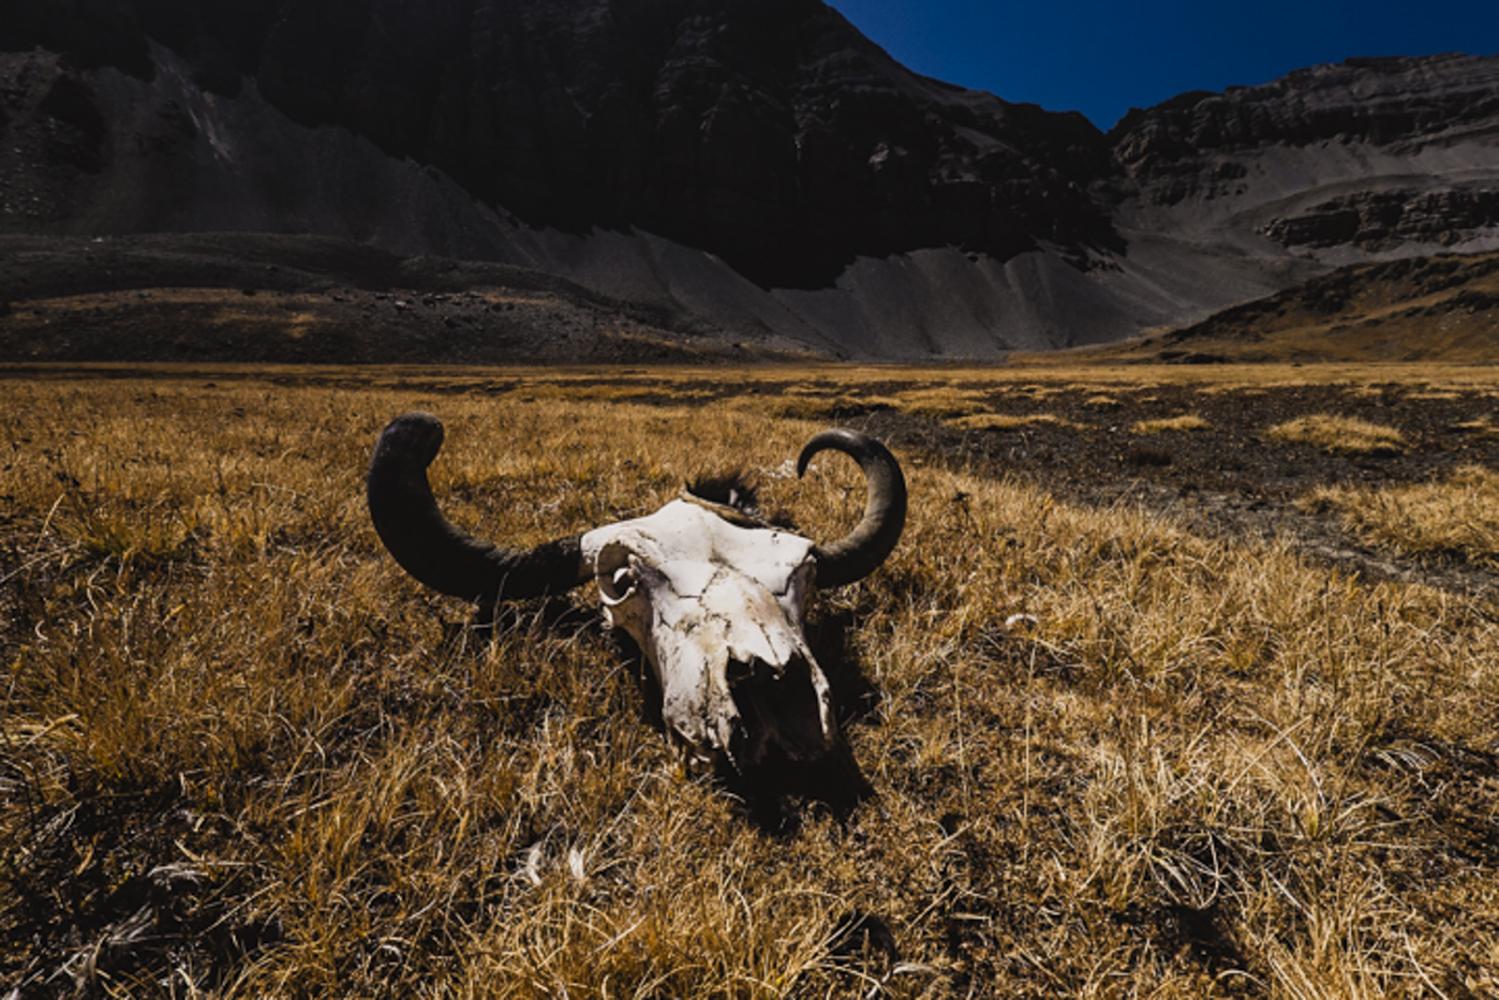 A yak skull remains in the parched mountains near the border of Tibet.